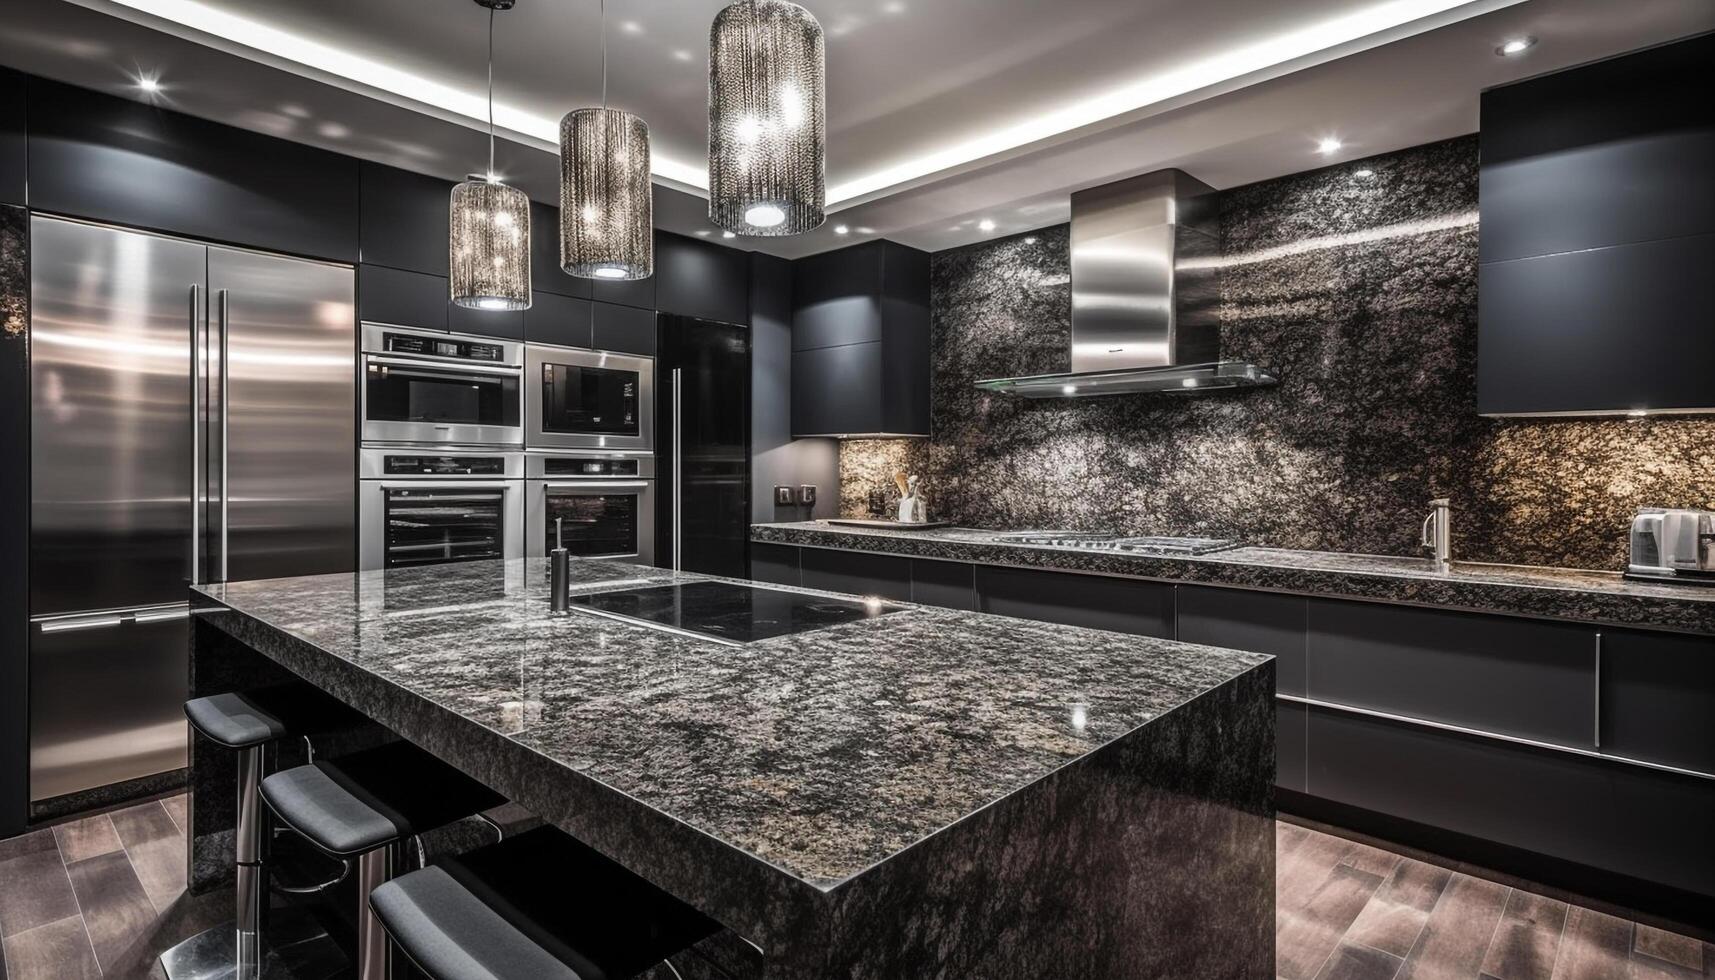 Modern luxury kitchen with stainless steel appliances, granite countertops, and marble flooring generated by AI photo